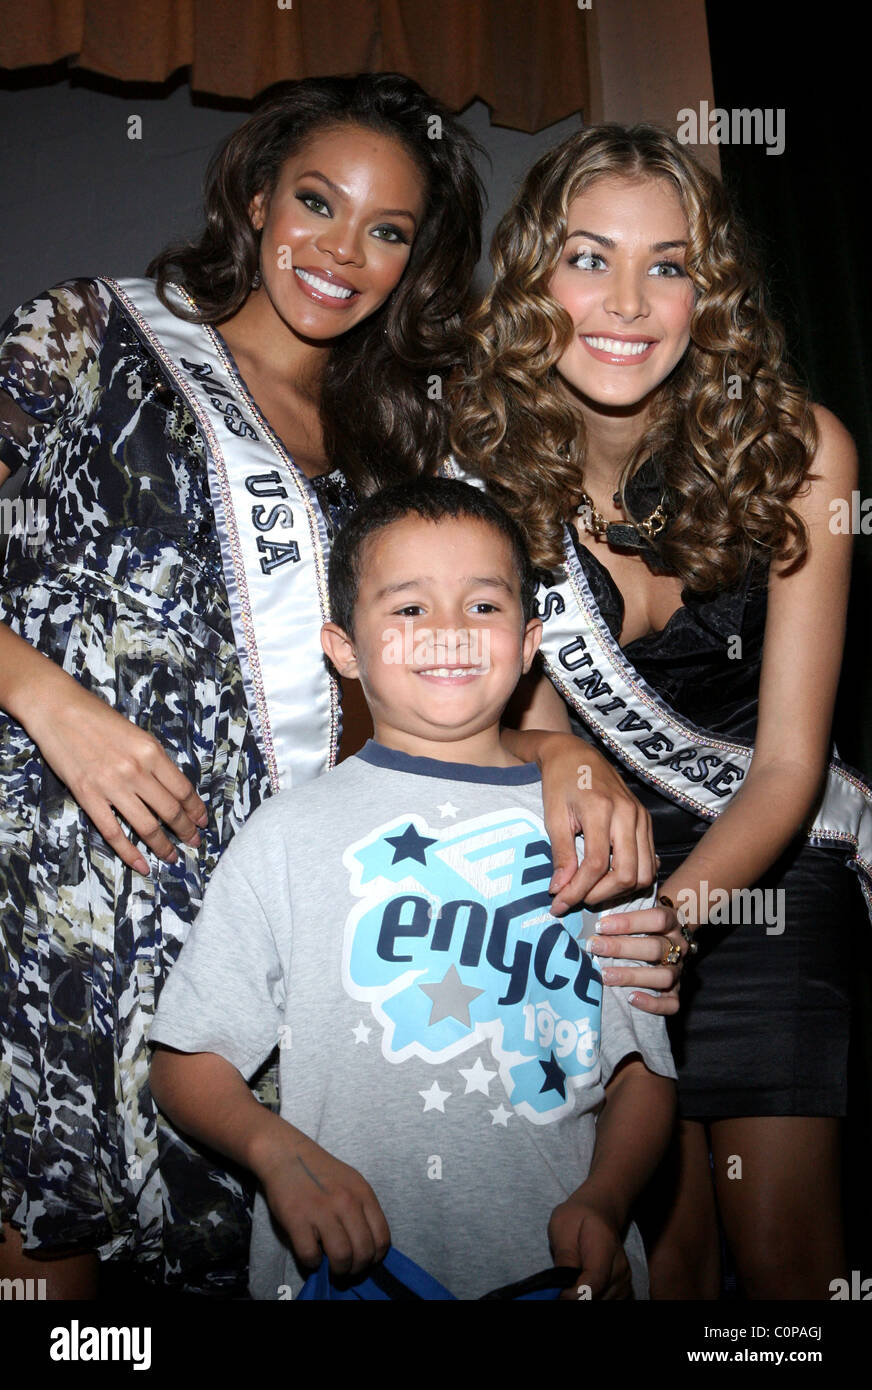 Miss Universe Dayana Mendoza and Miss USA attends the 'Blessings in a Backpack' sponsored by Nina Footwear New York City, USA - Stock Photo